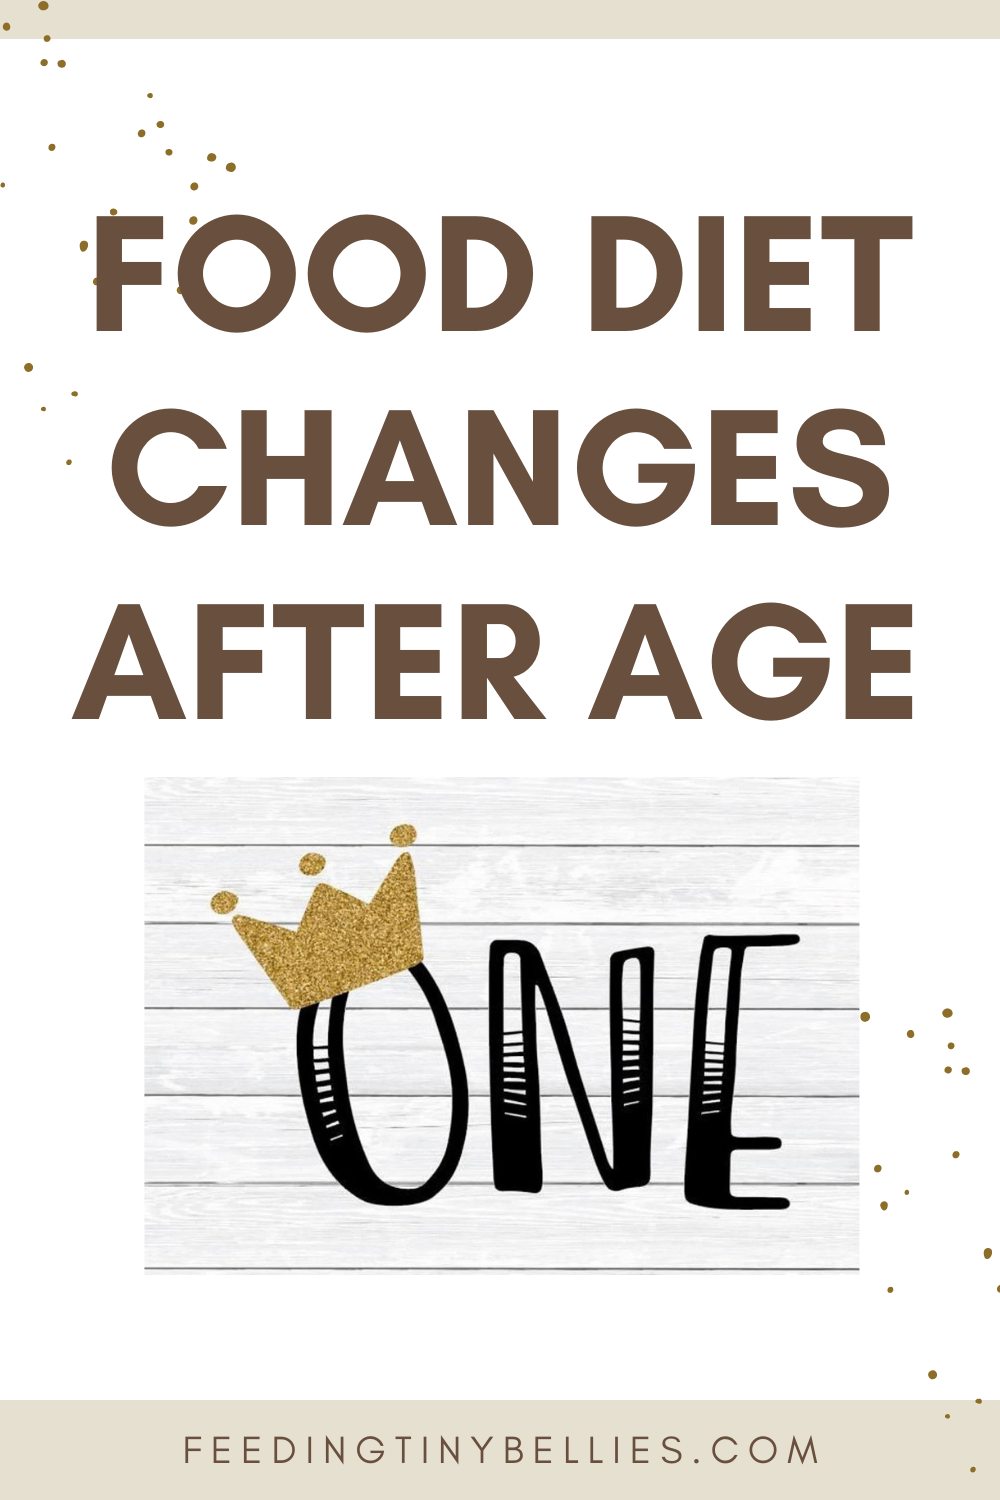 Food diet changes after age one